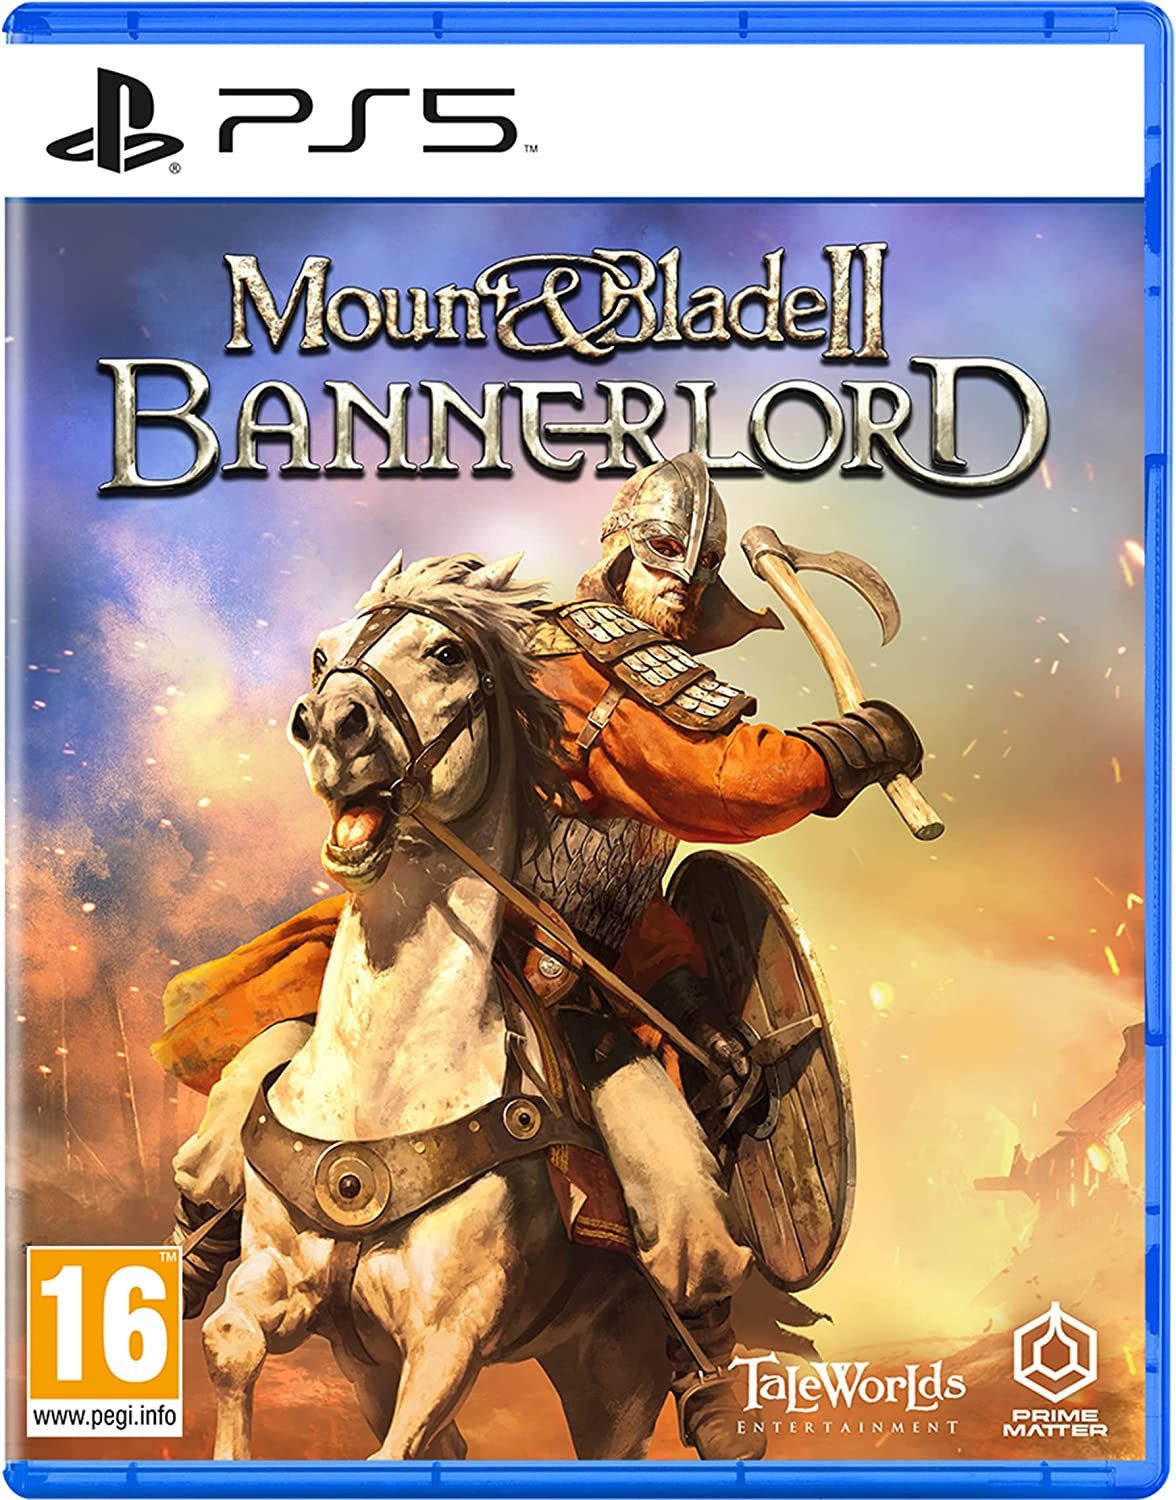 Retrouvez notre TEST : Mount and Blade II: Bannerlord